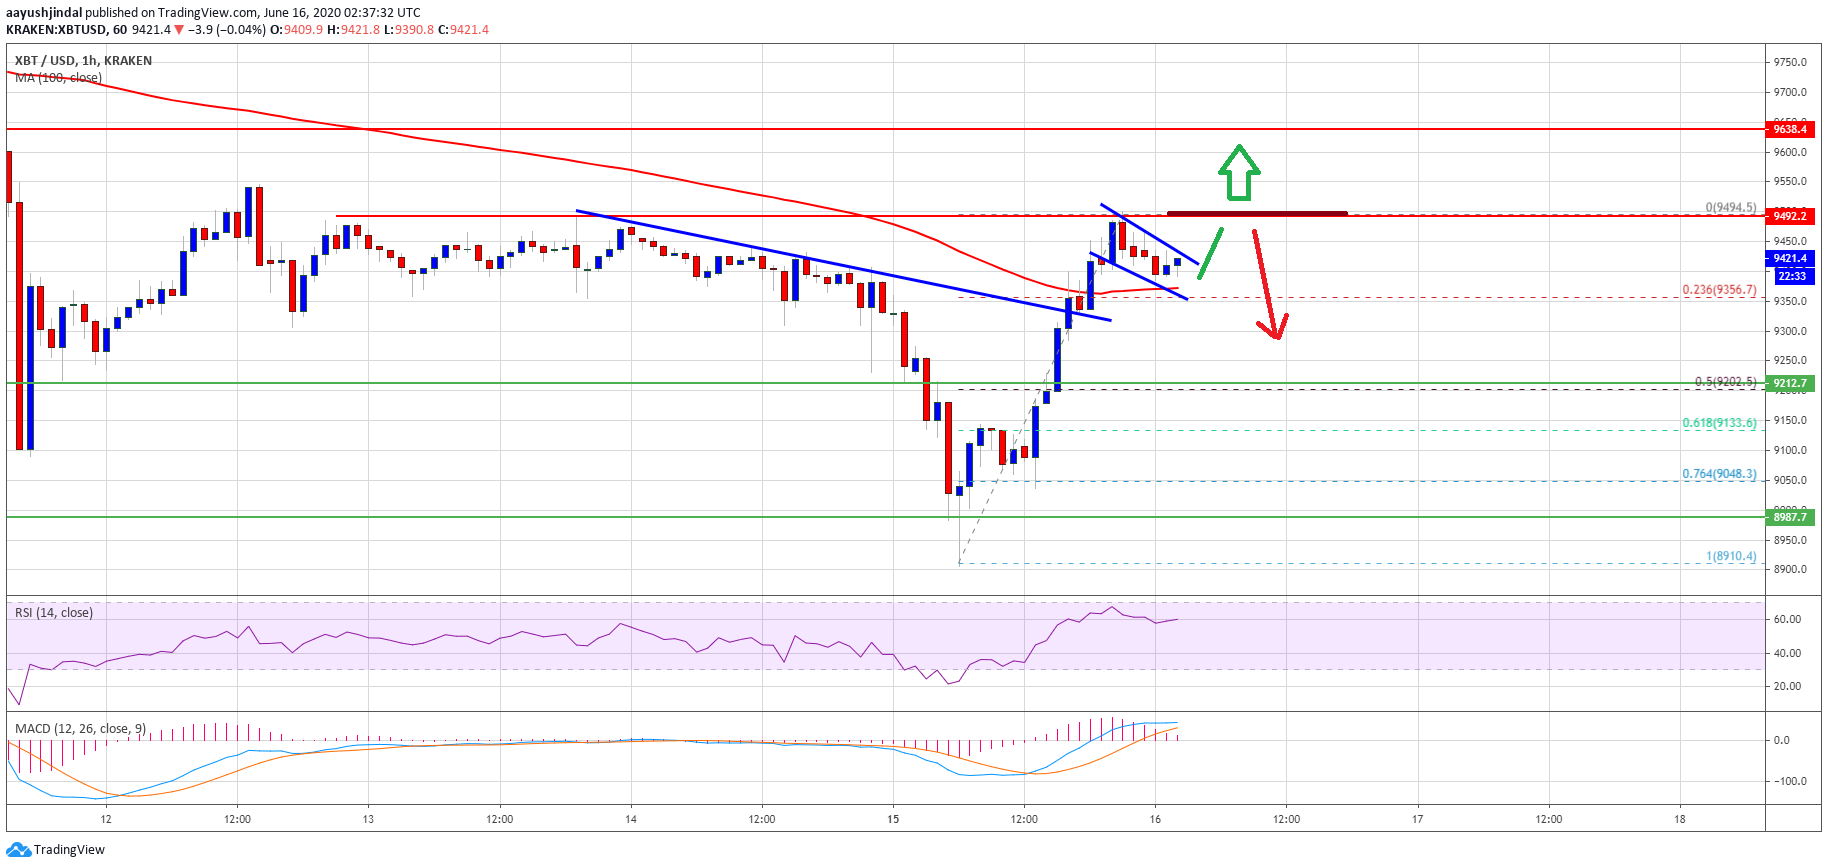 Bitcoin Recovers Sharply Above 100 SMA But $9,500 Holds...